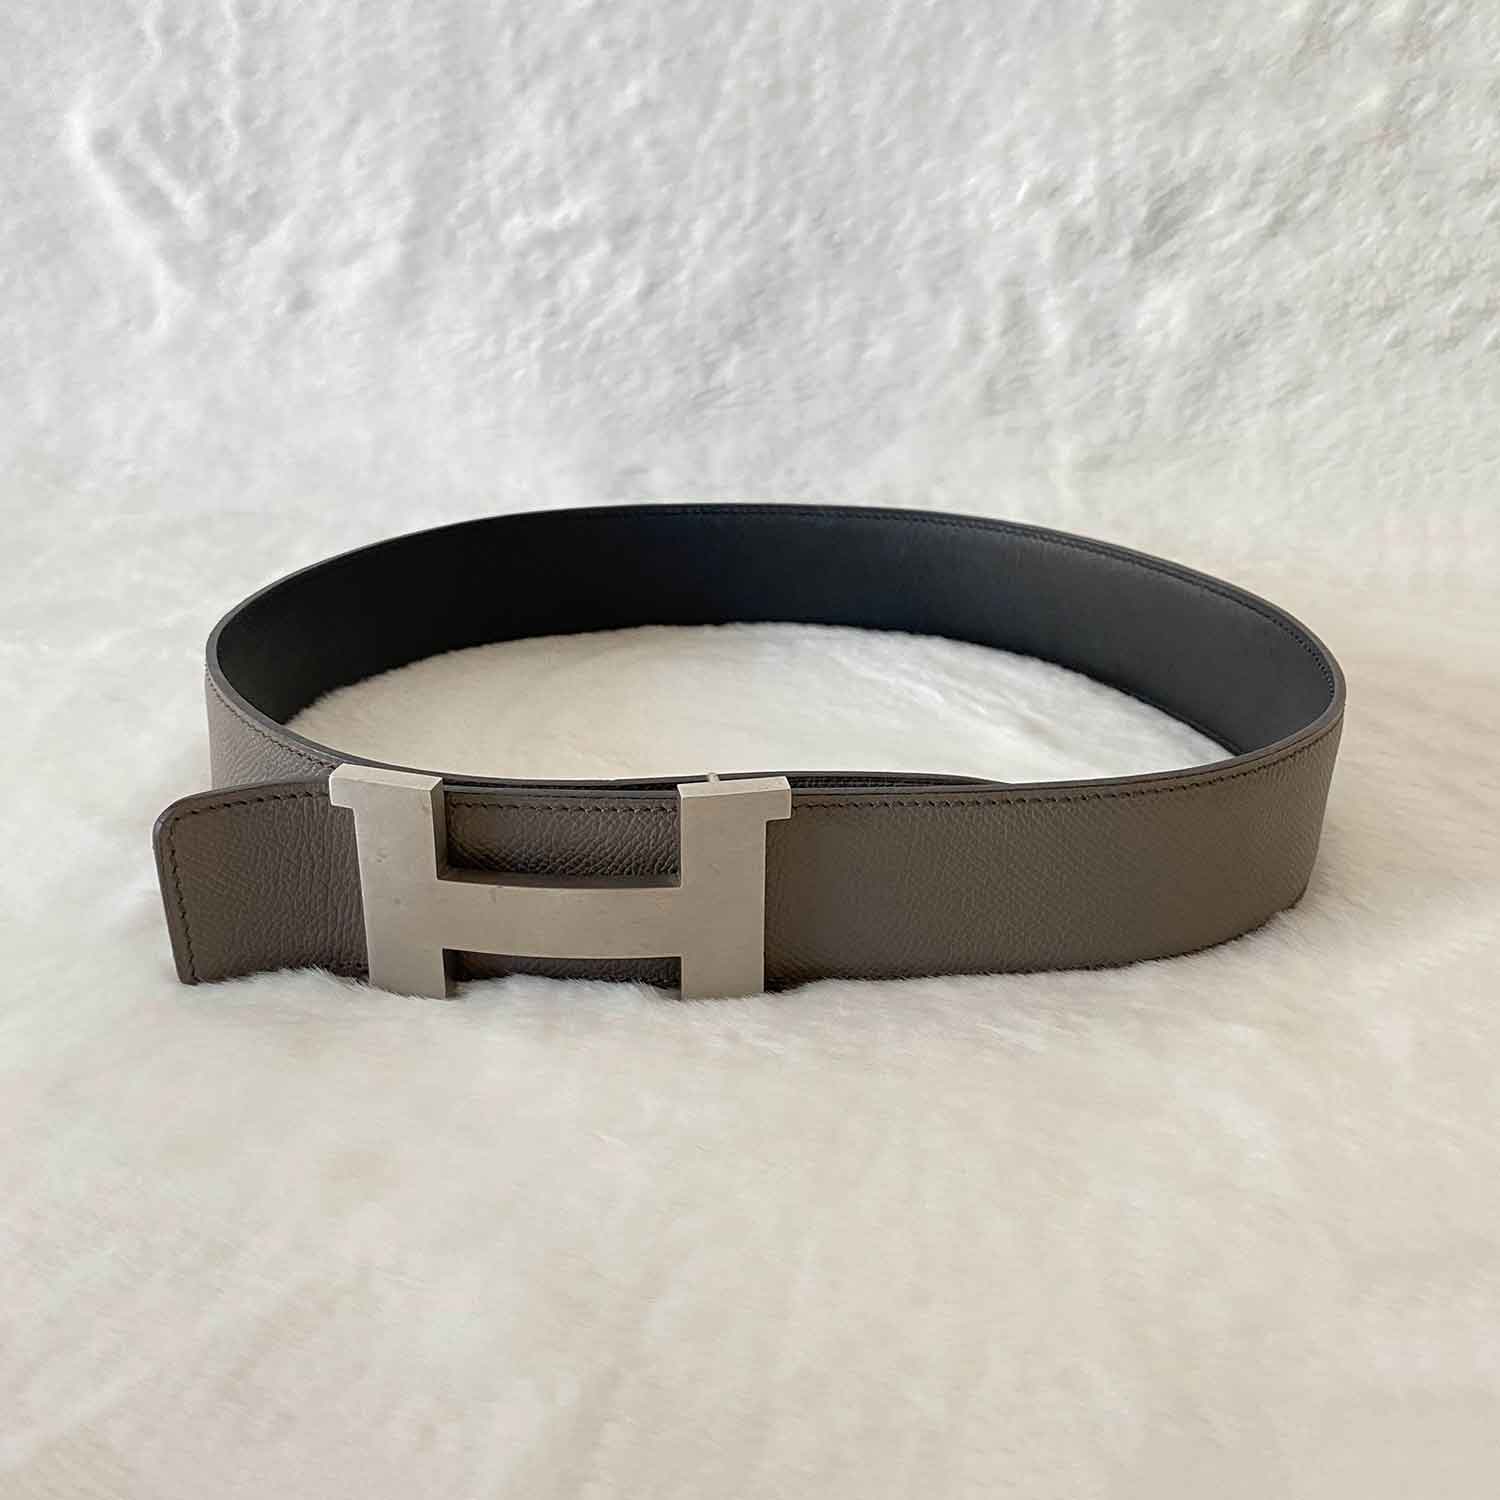 Shop authentic Hermès H Belt Buckle and Reversible Strap at revogue for ...